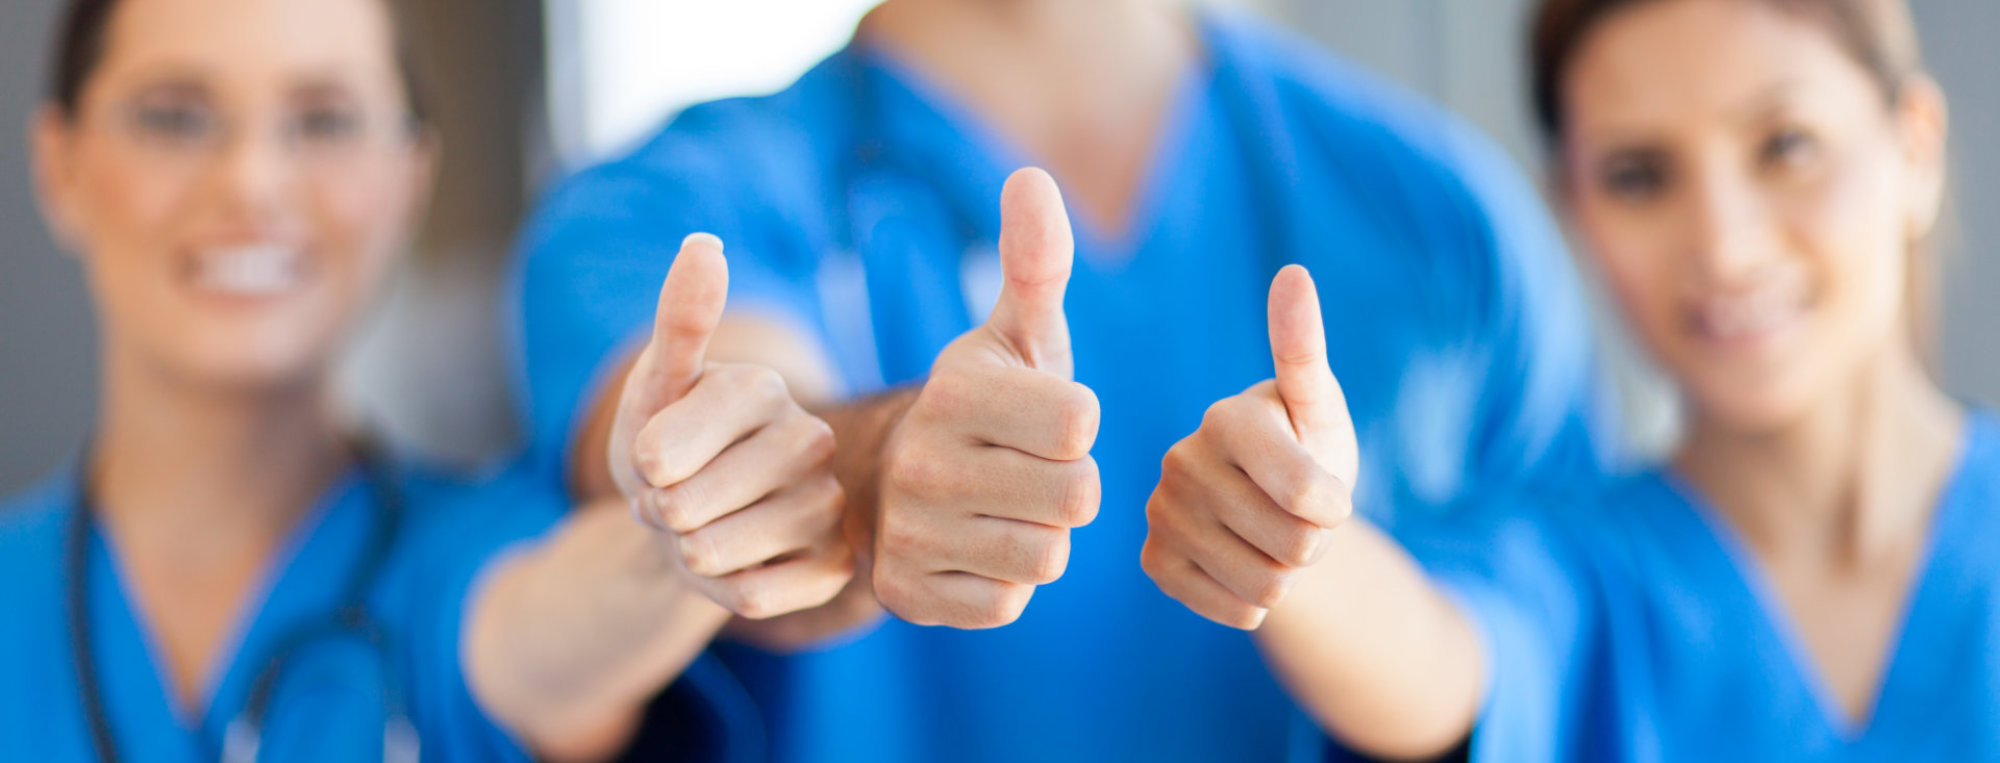 group of nurses doing a thumbs up